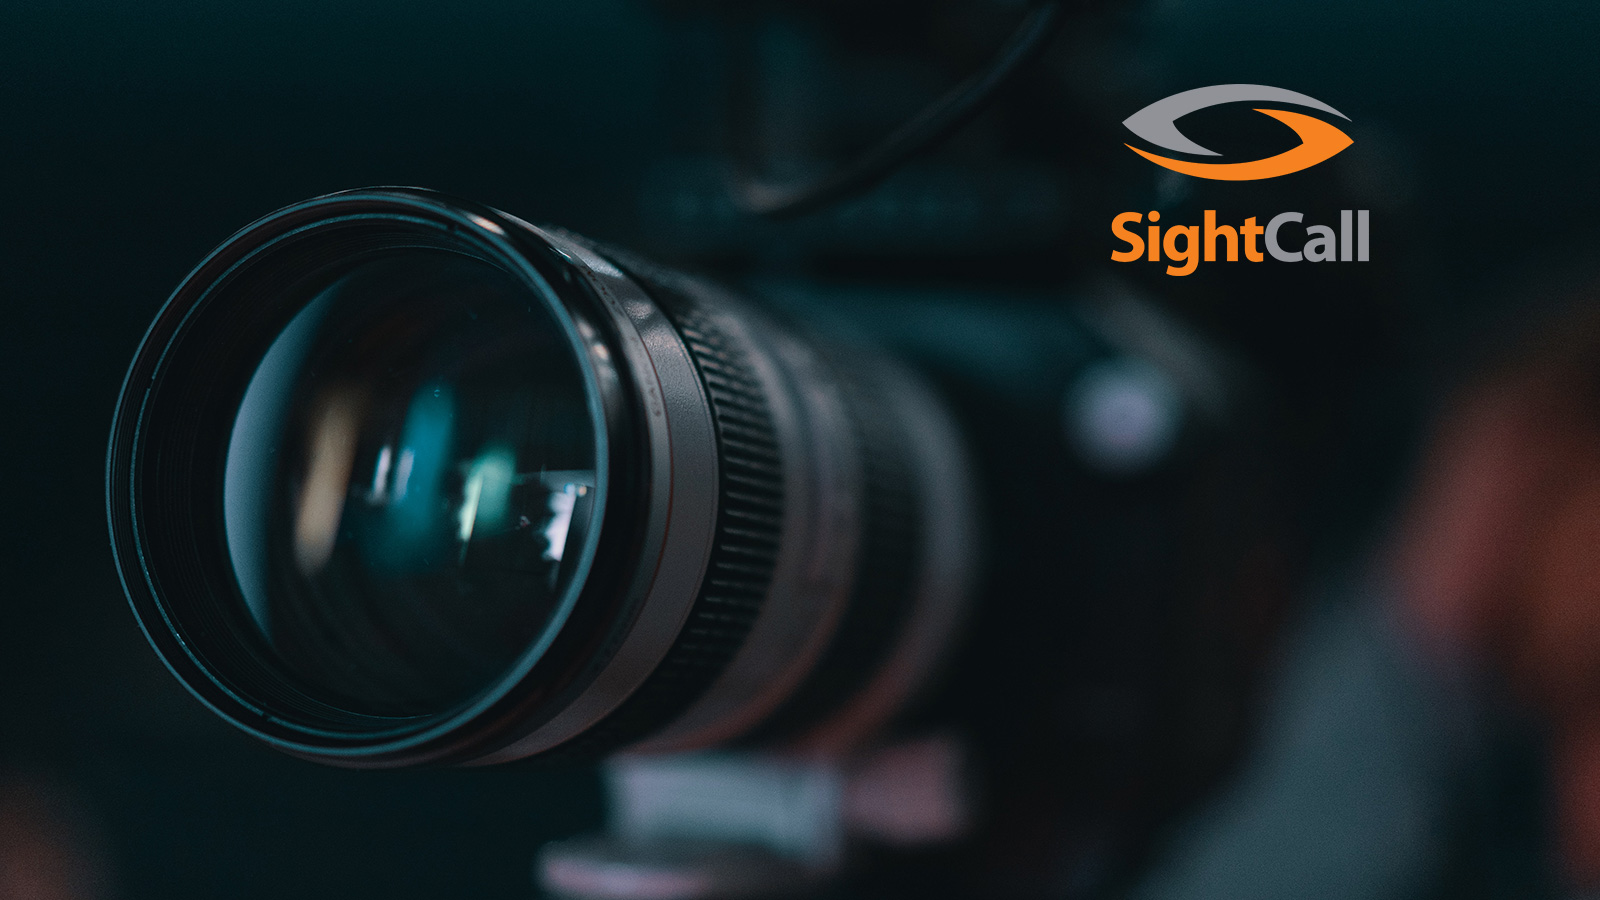 SightCall Announces SightCall Video Assistance Chatbot on Salesforce AppExchange, the World's Leading Enterprise Cloud Marketplace